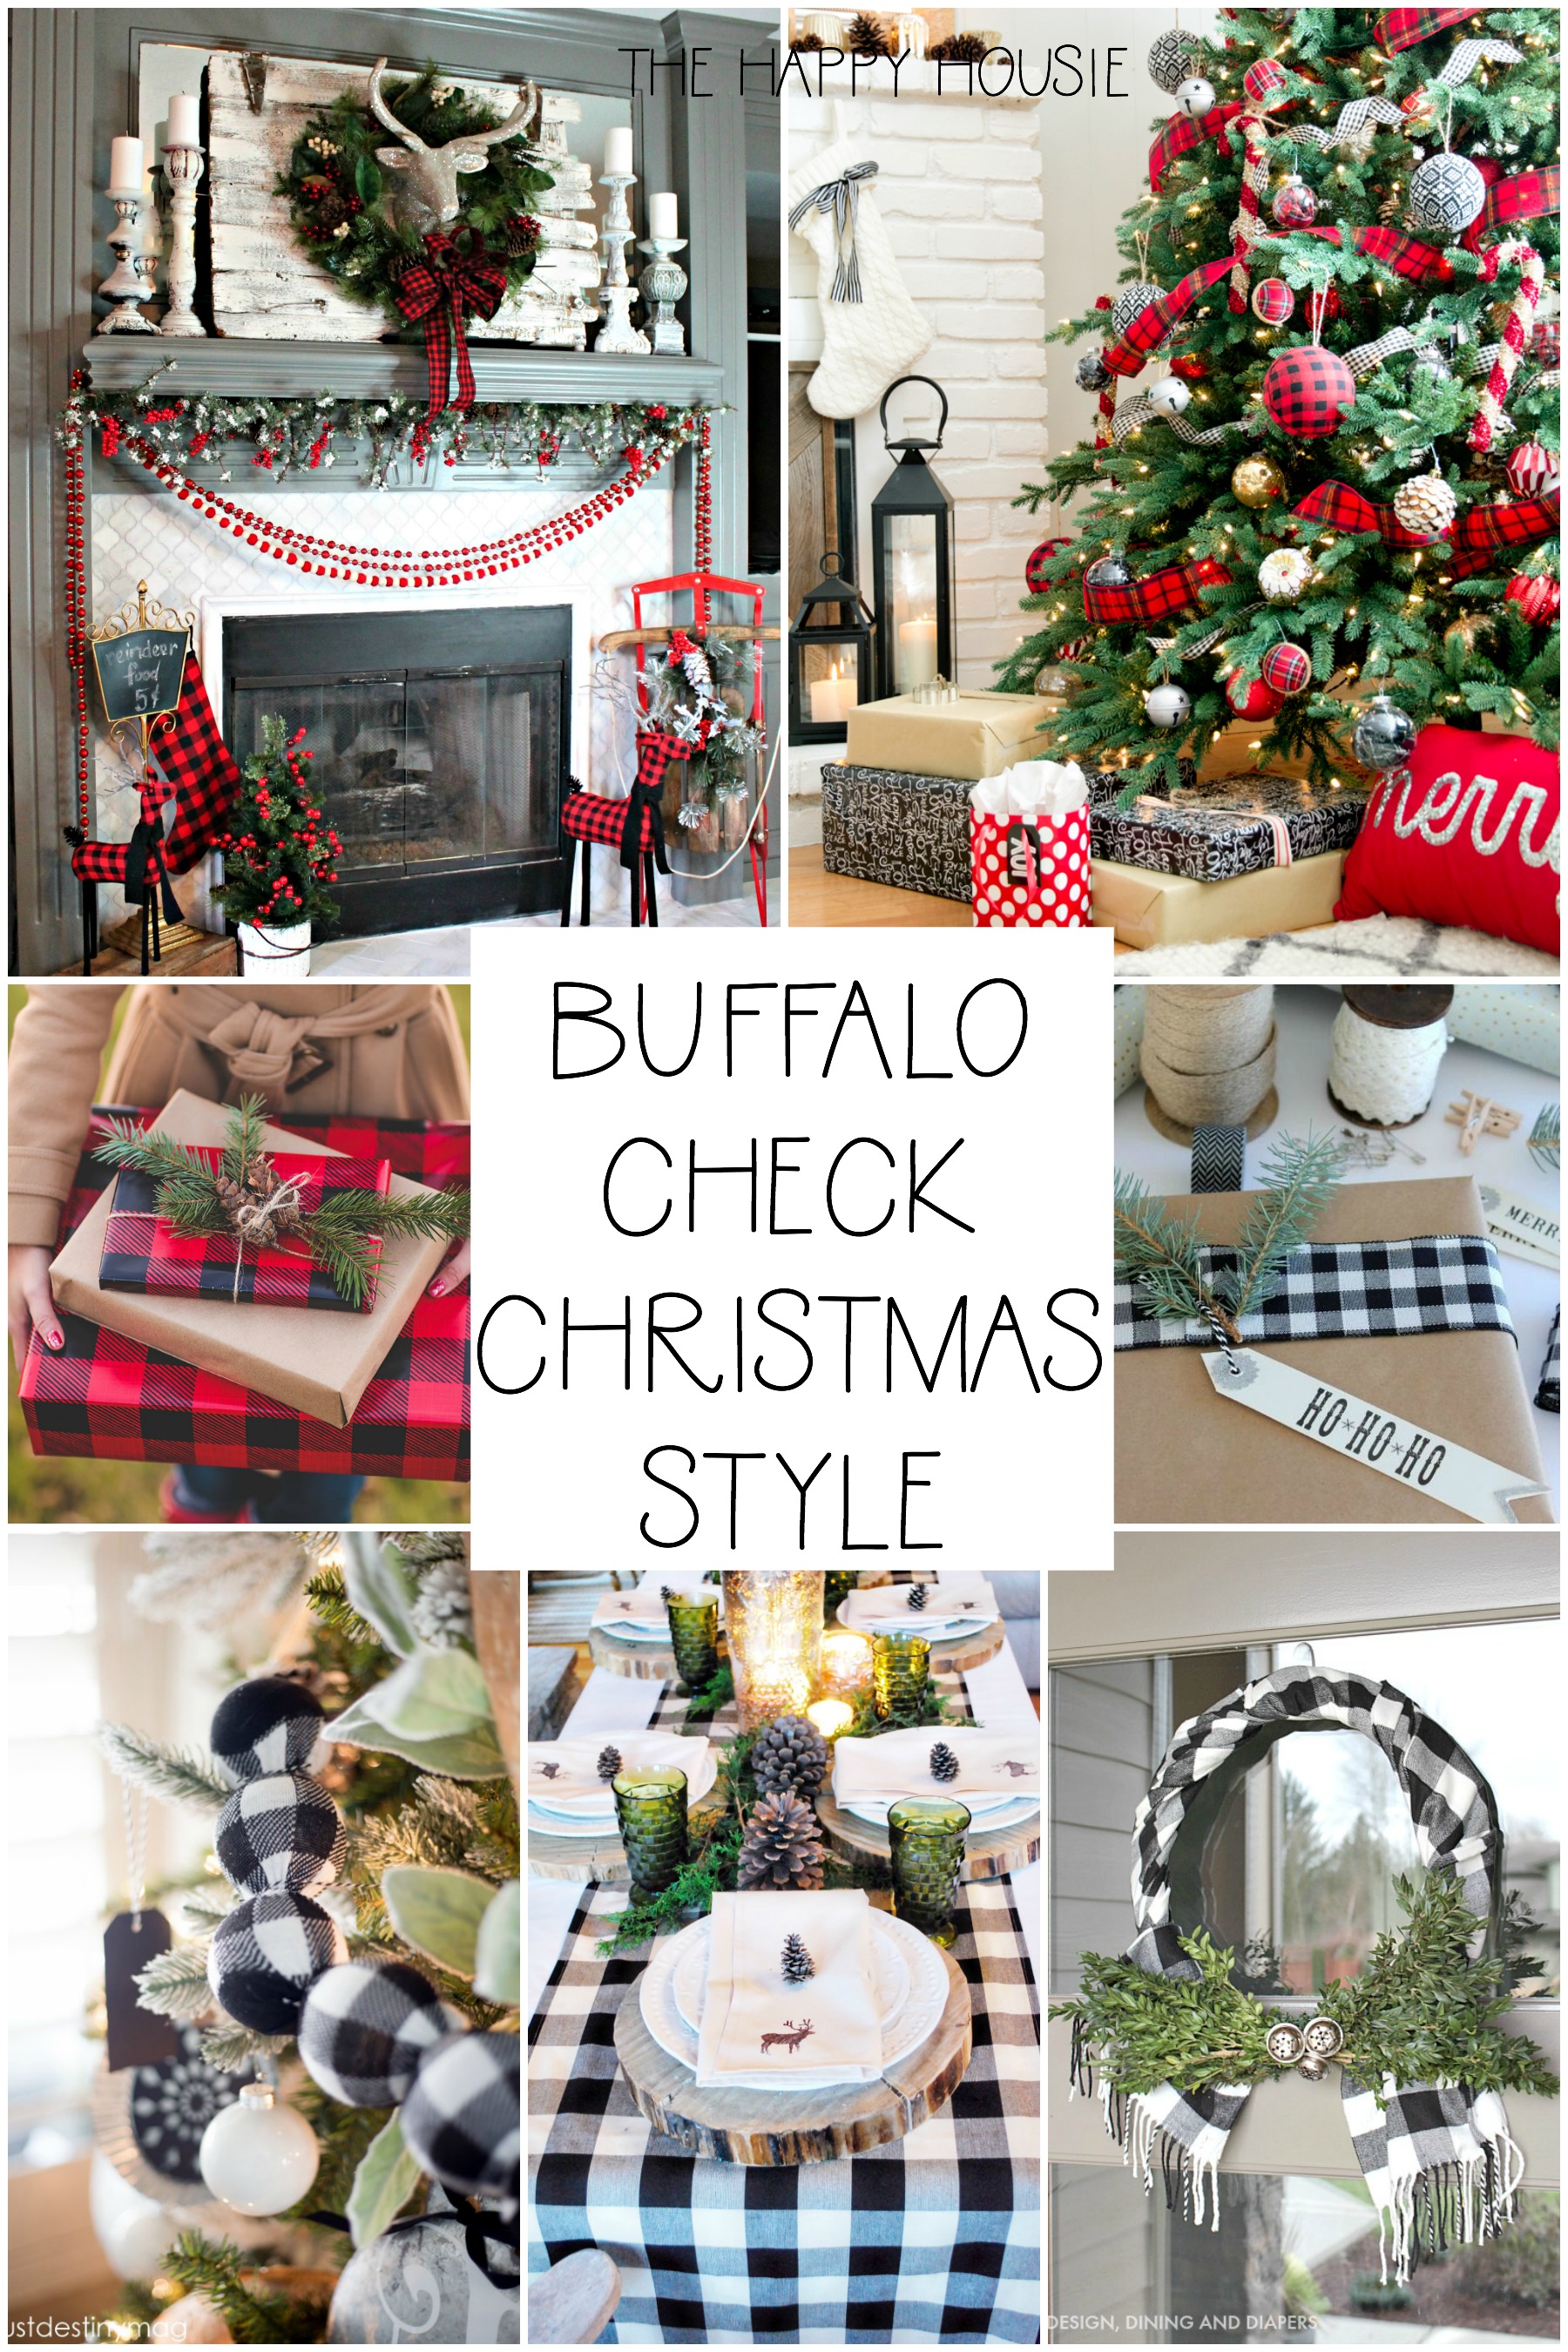 https://www.thehappyhousie.com/wp-content/uploads/2016/12/Buffalo-check-Christmas-Style-at-the-happy-housie.jpg